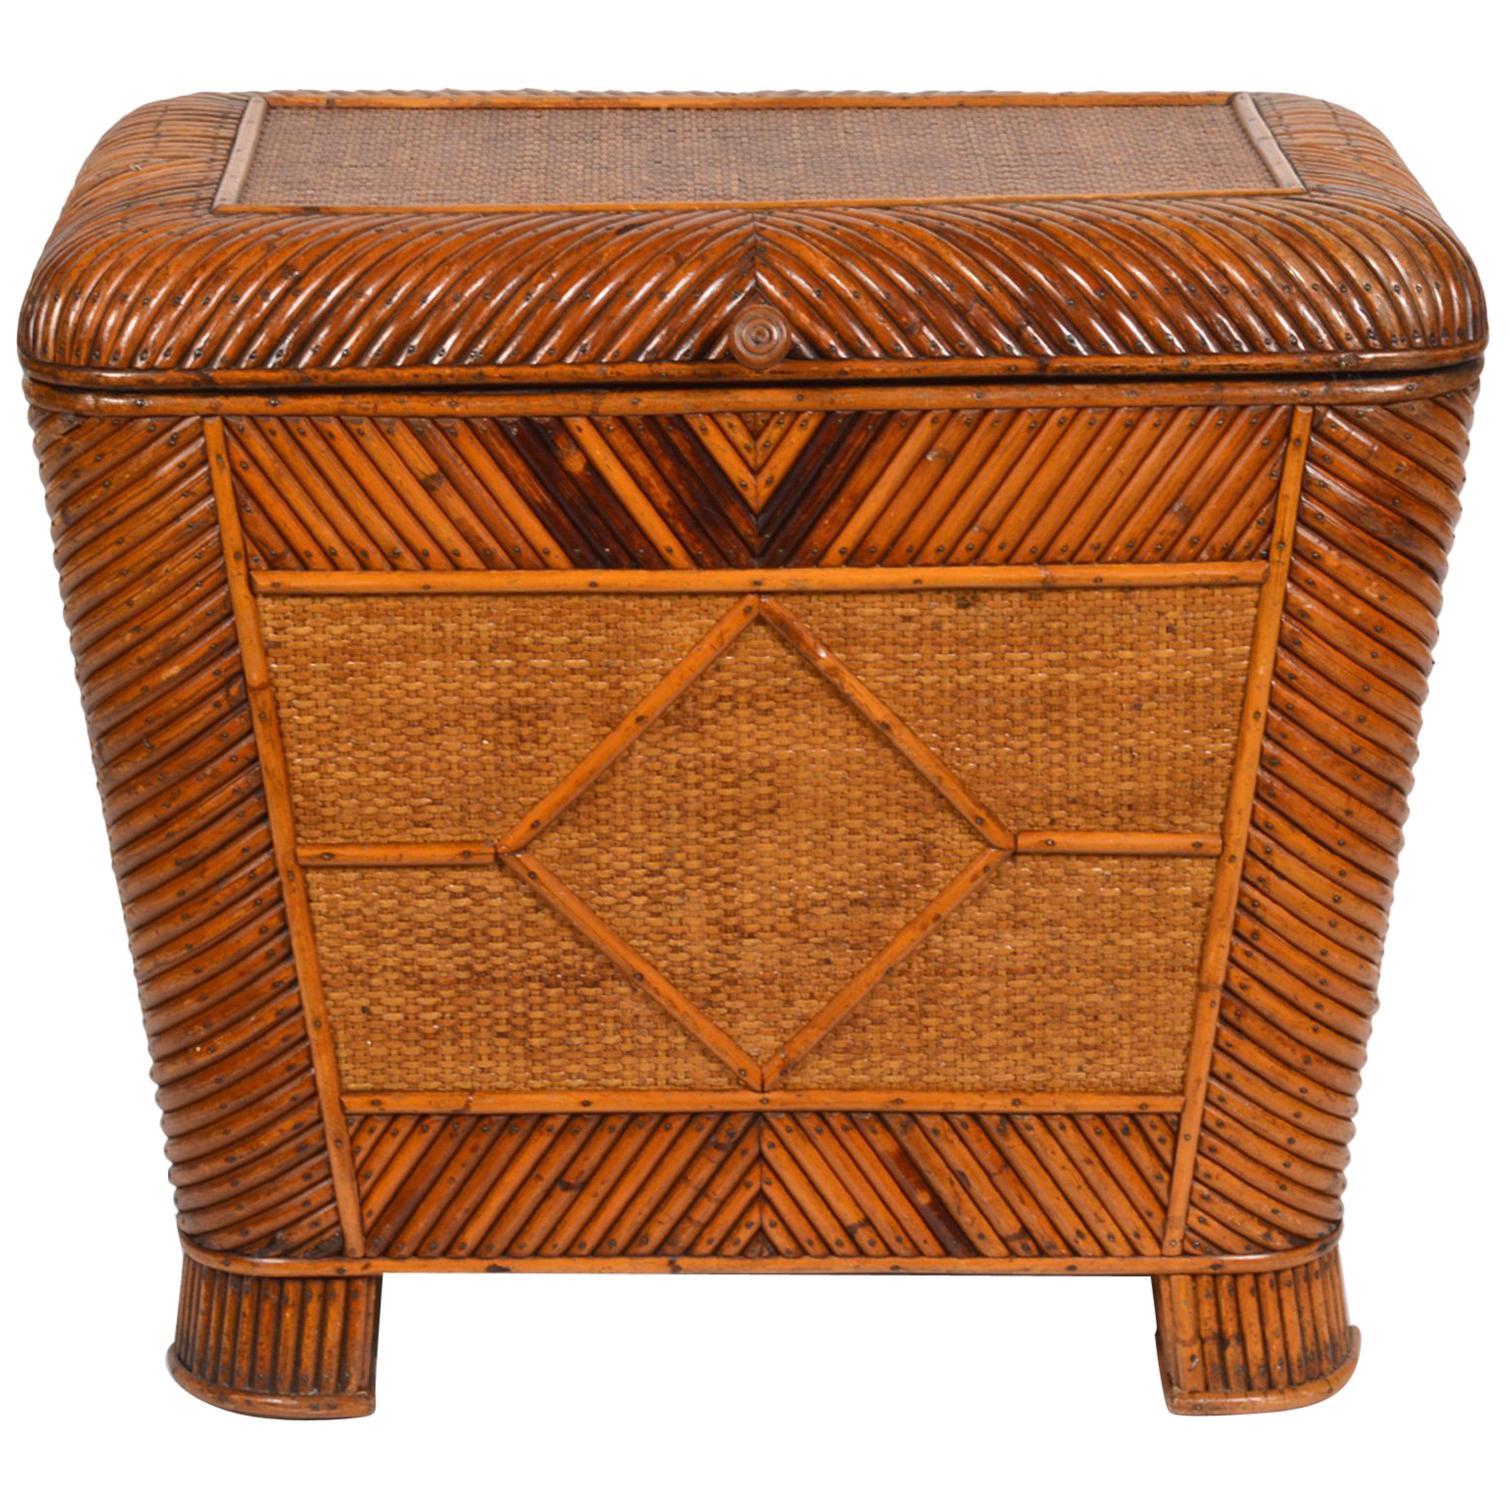 19th Century English Patterned Bamboo and Raffia Weave Covered Storage Box